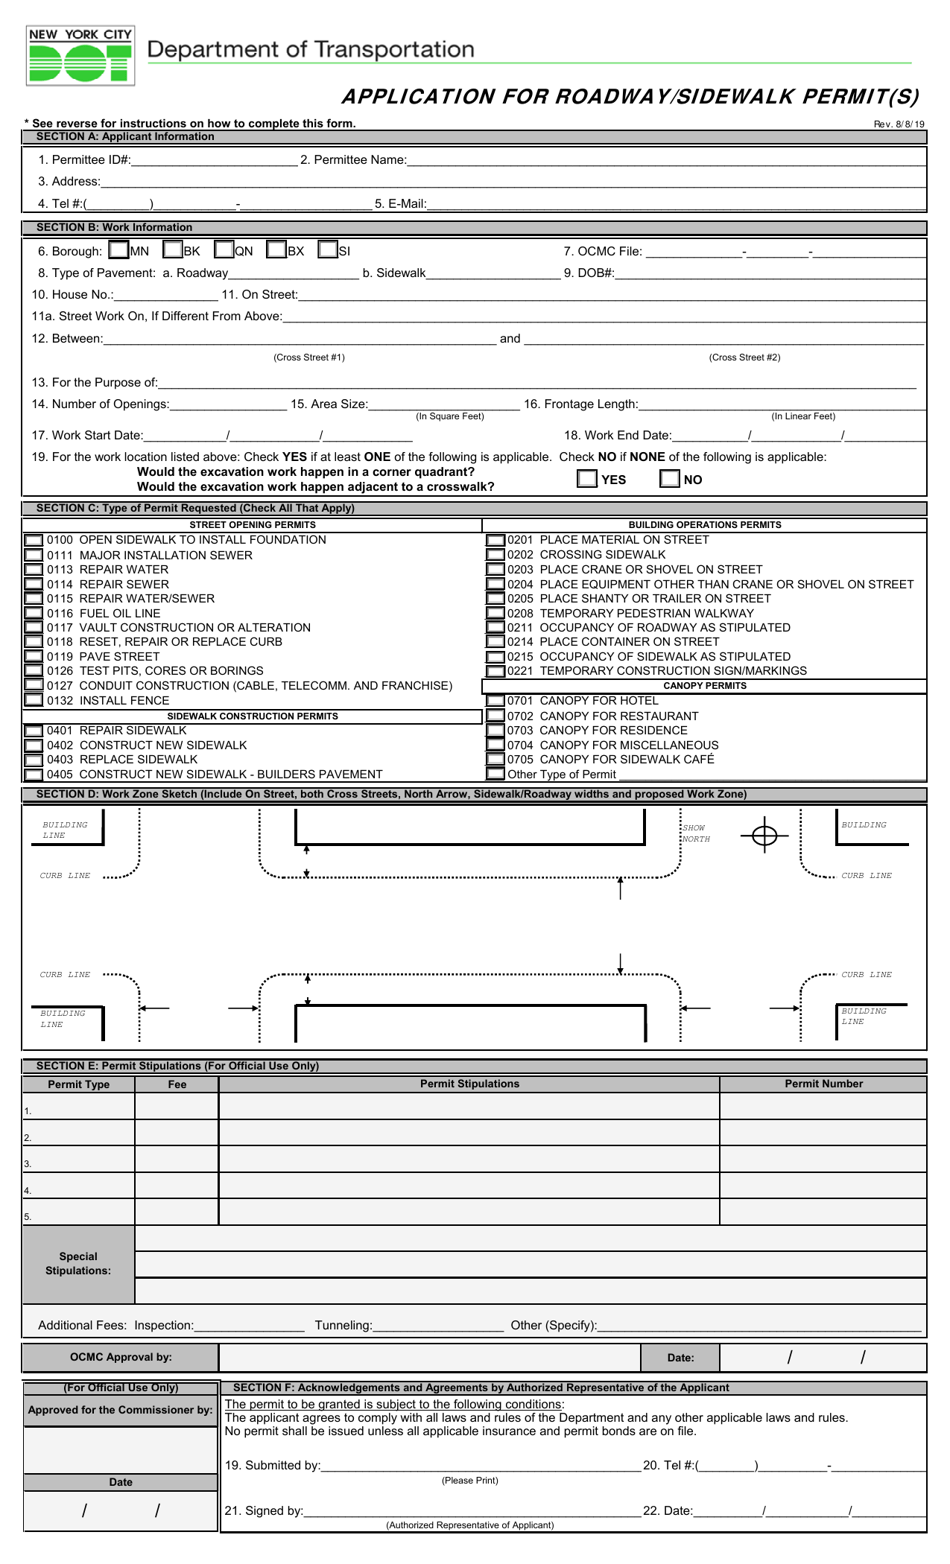 Application for Roadway / Sidewalk Permit(S) - New York City, Page 1